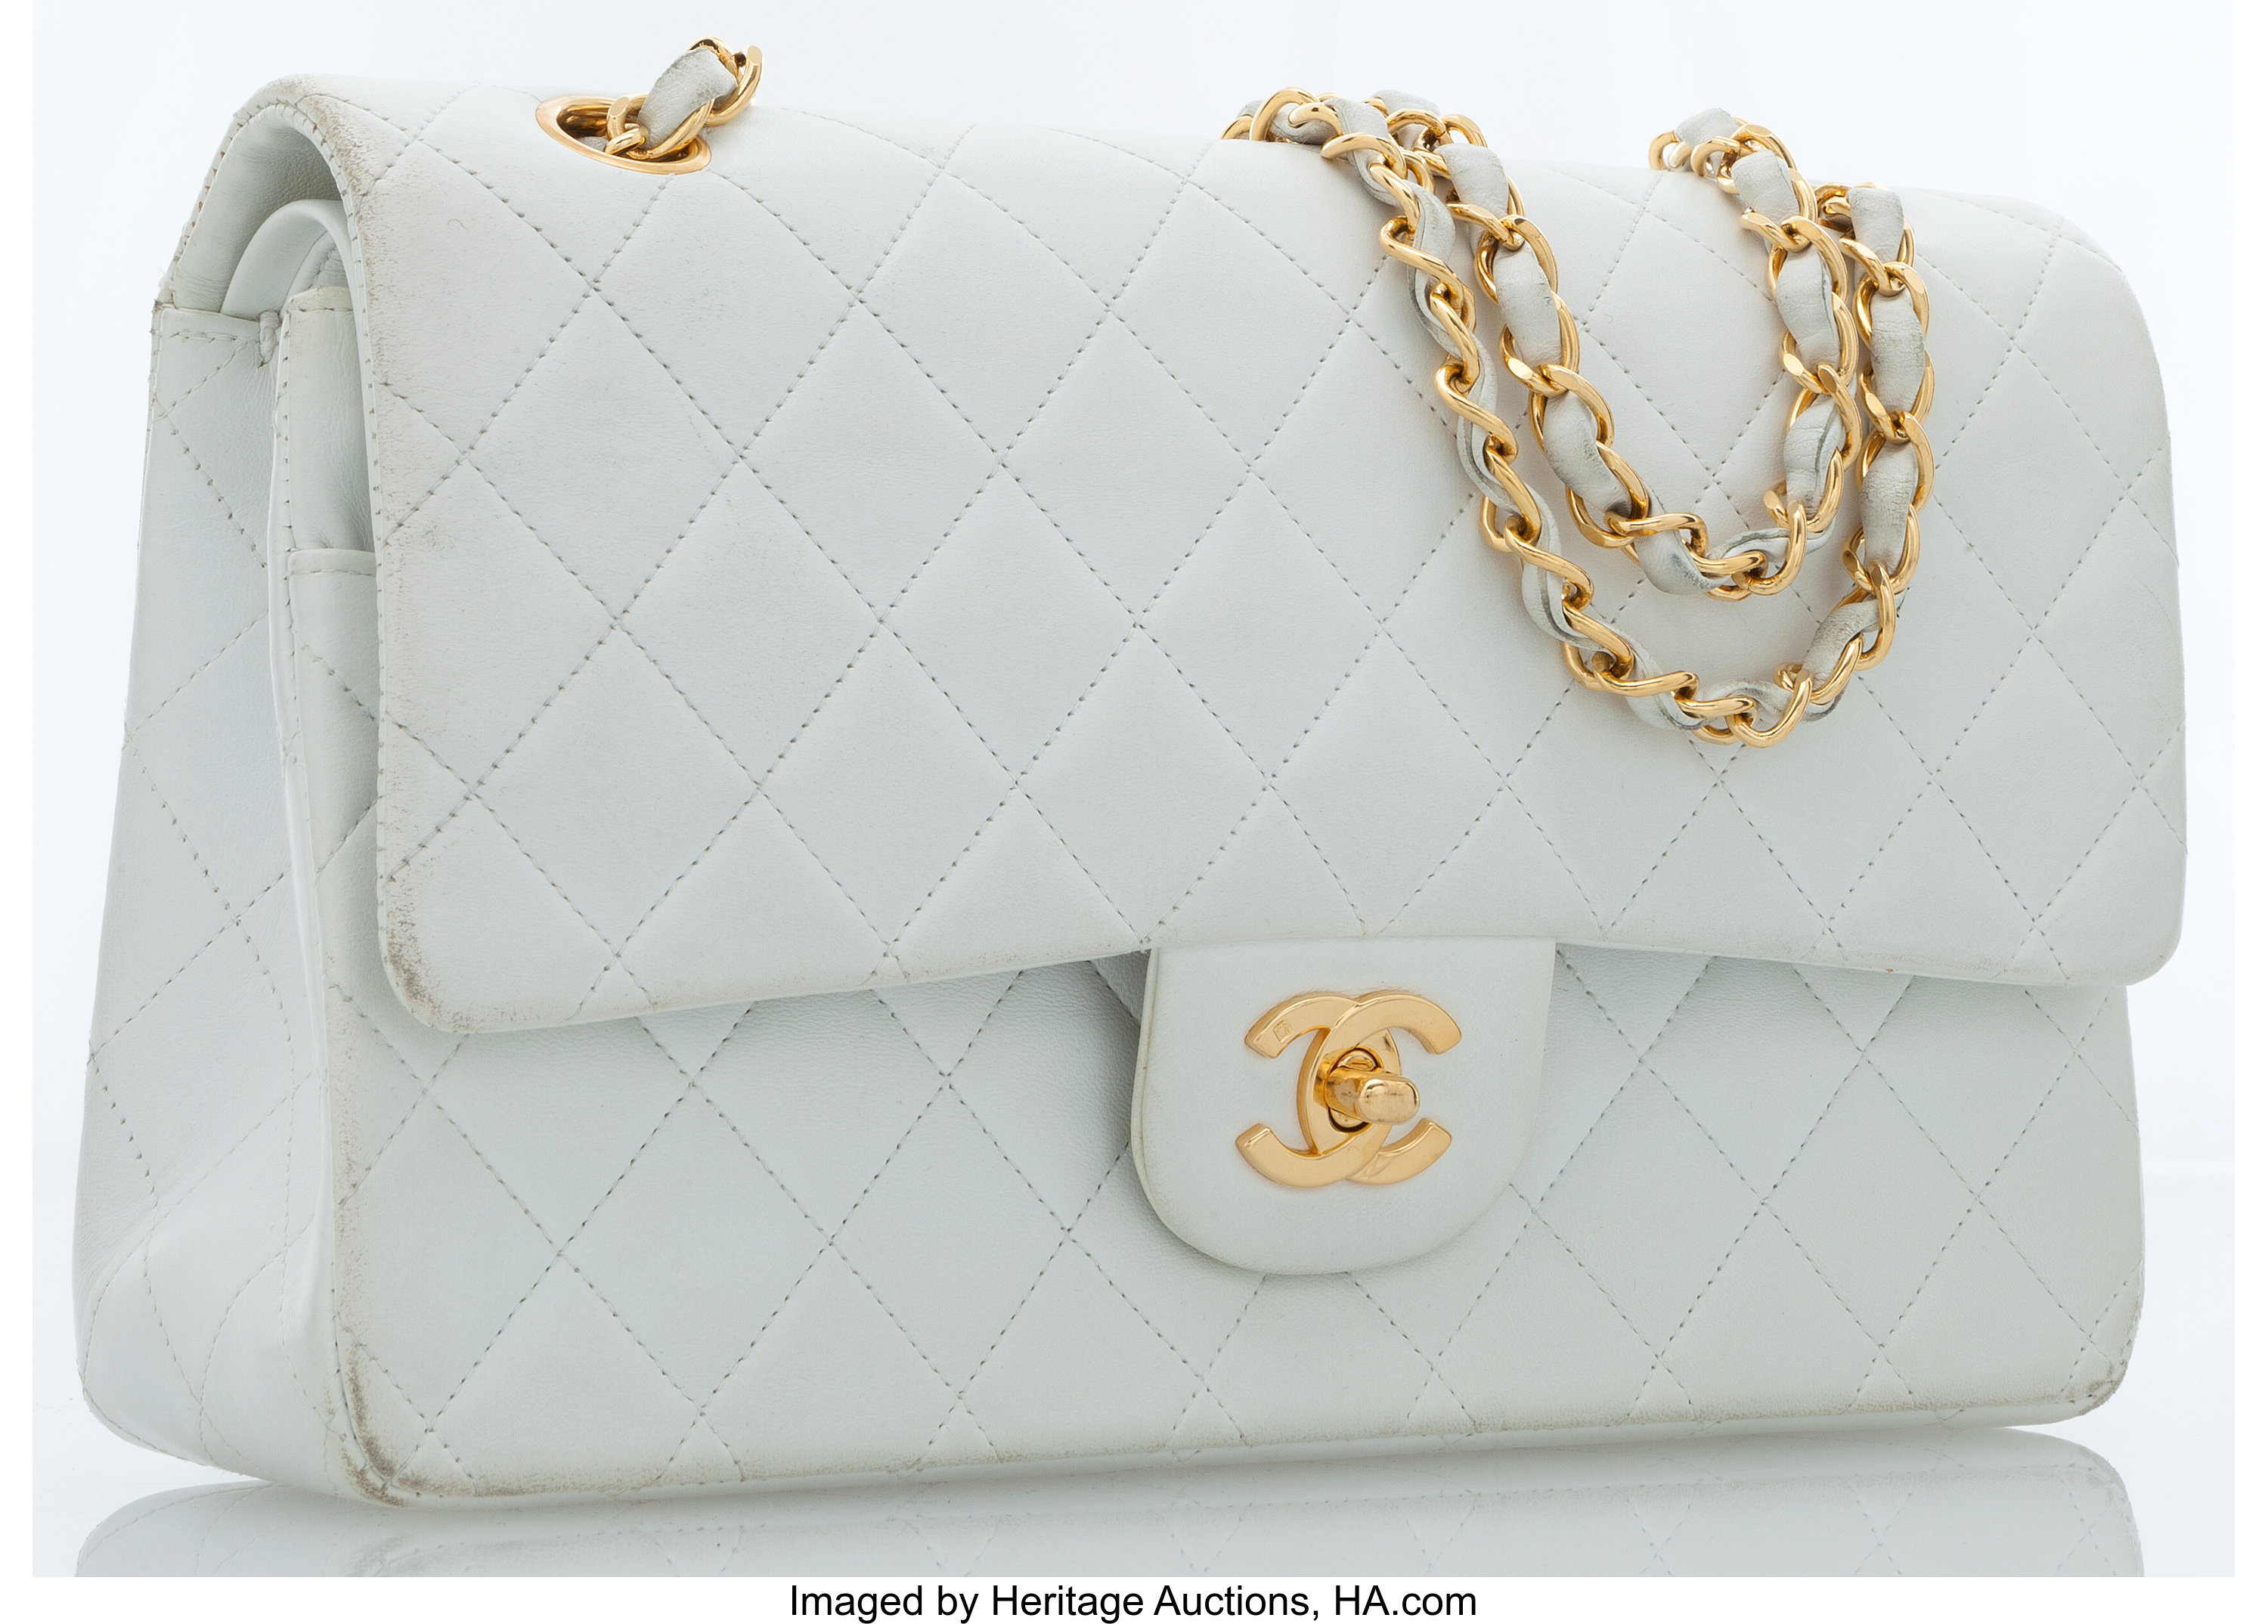 Sold at Auction: Chanel Vintage White Quilted Leather Belt Bag